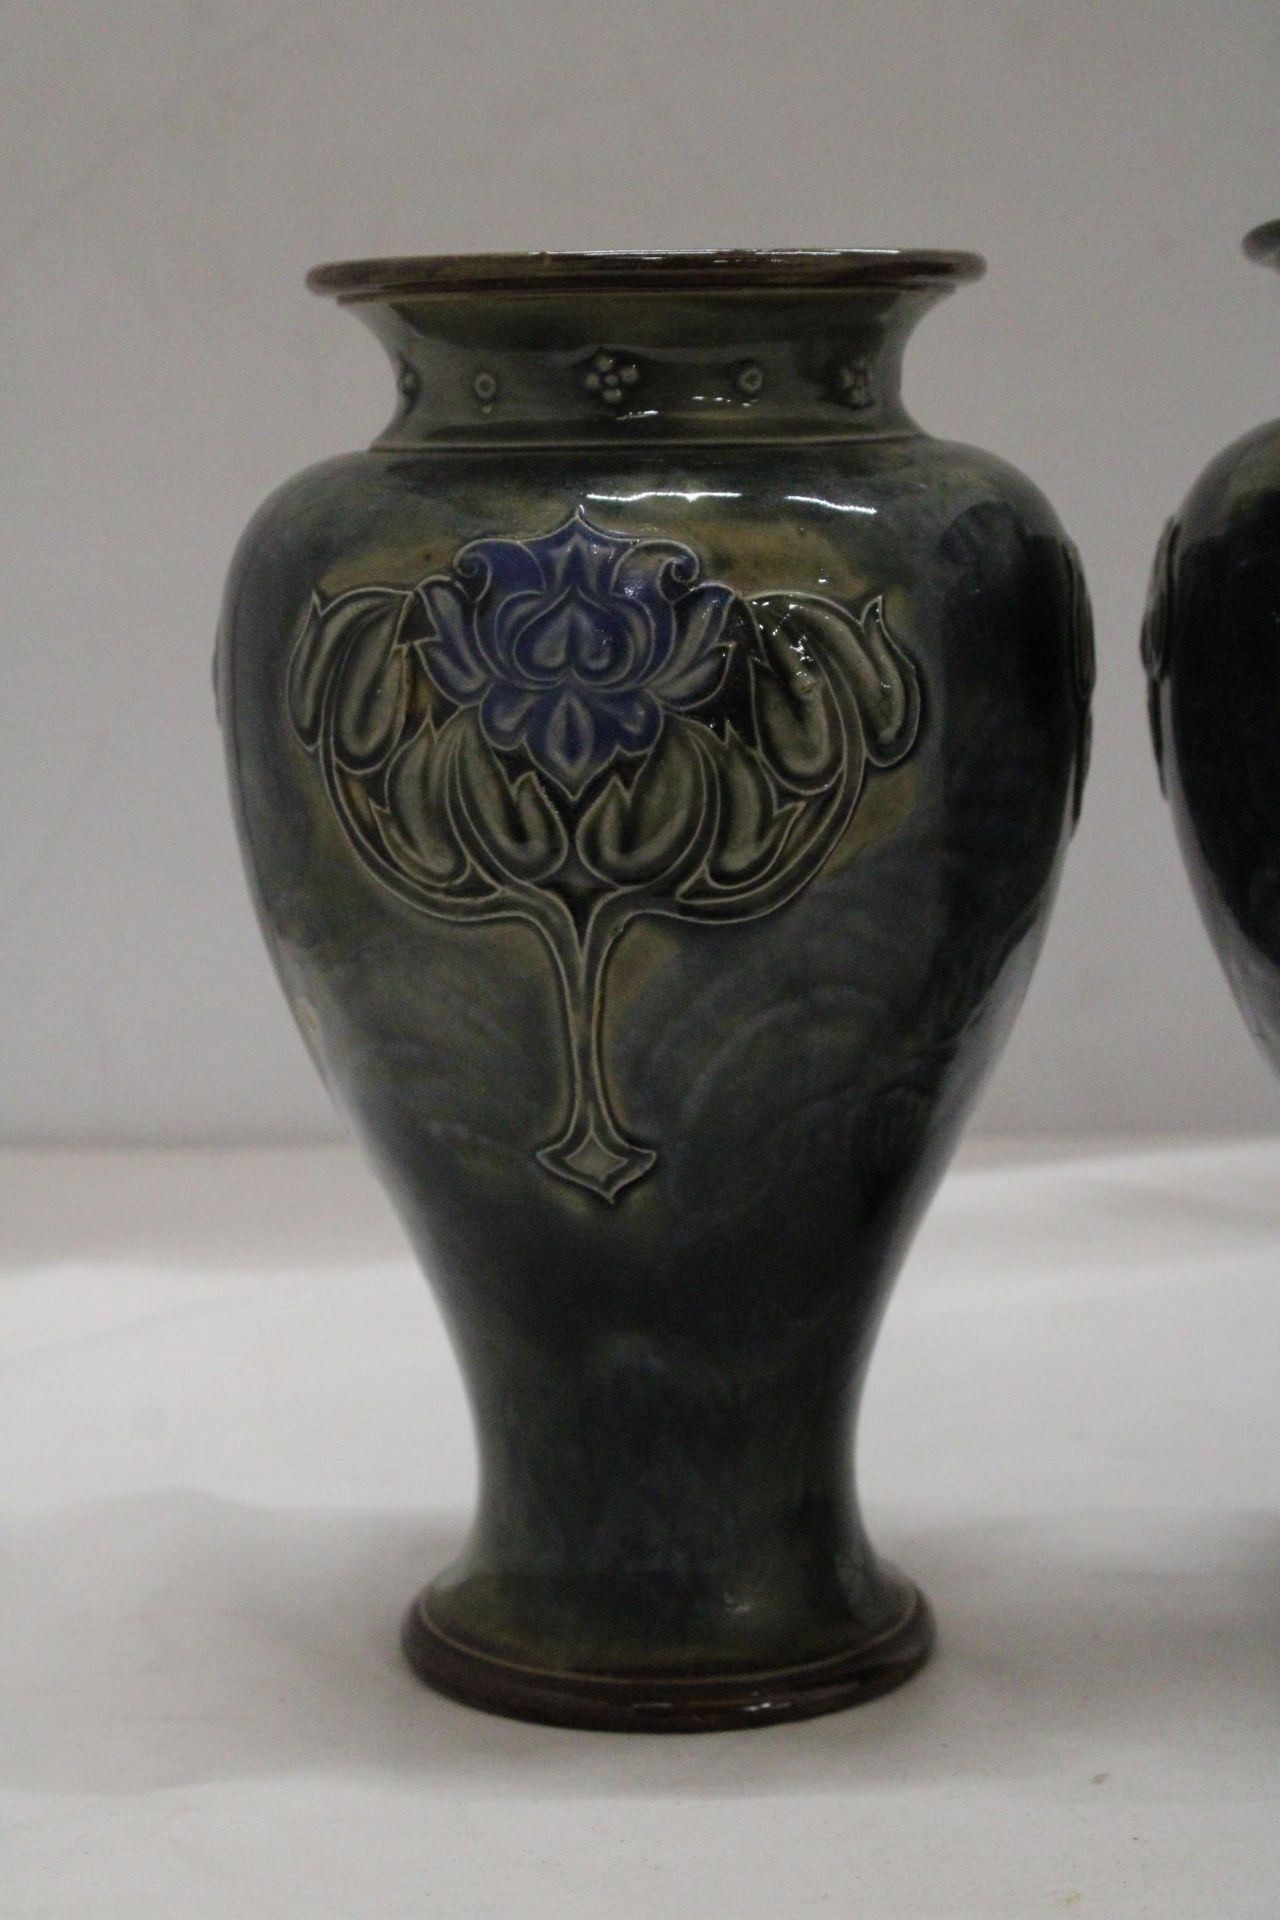 A PAIR OF ROYAL DOULTON LILY PARTINGTON ART NOUVEAU STYLE VASES WITH RELIEF FLOWERS - Image 3 of 7